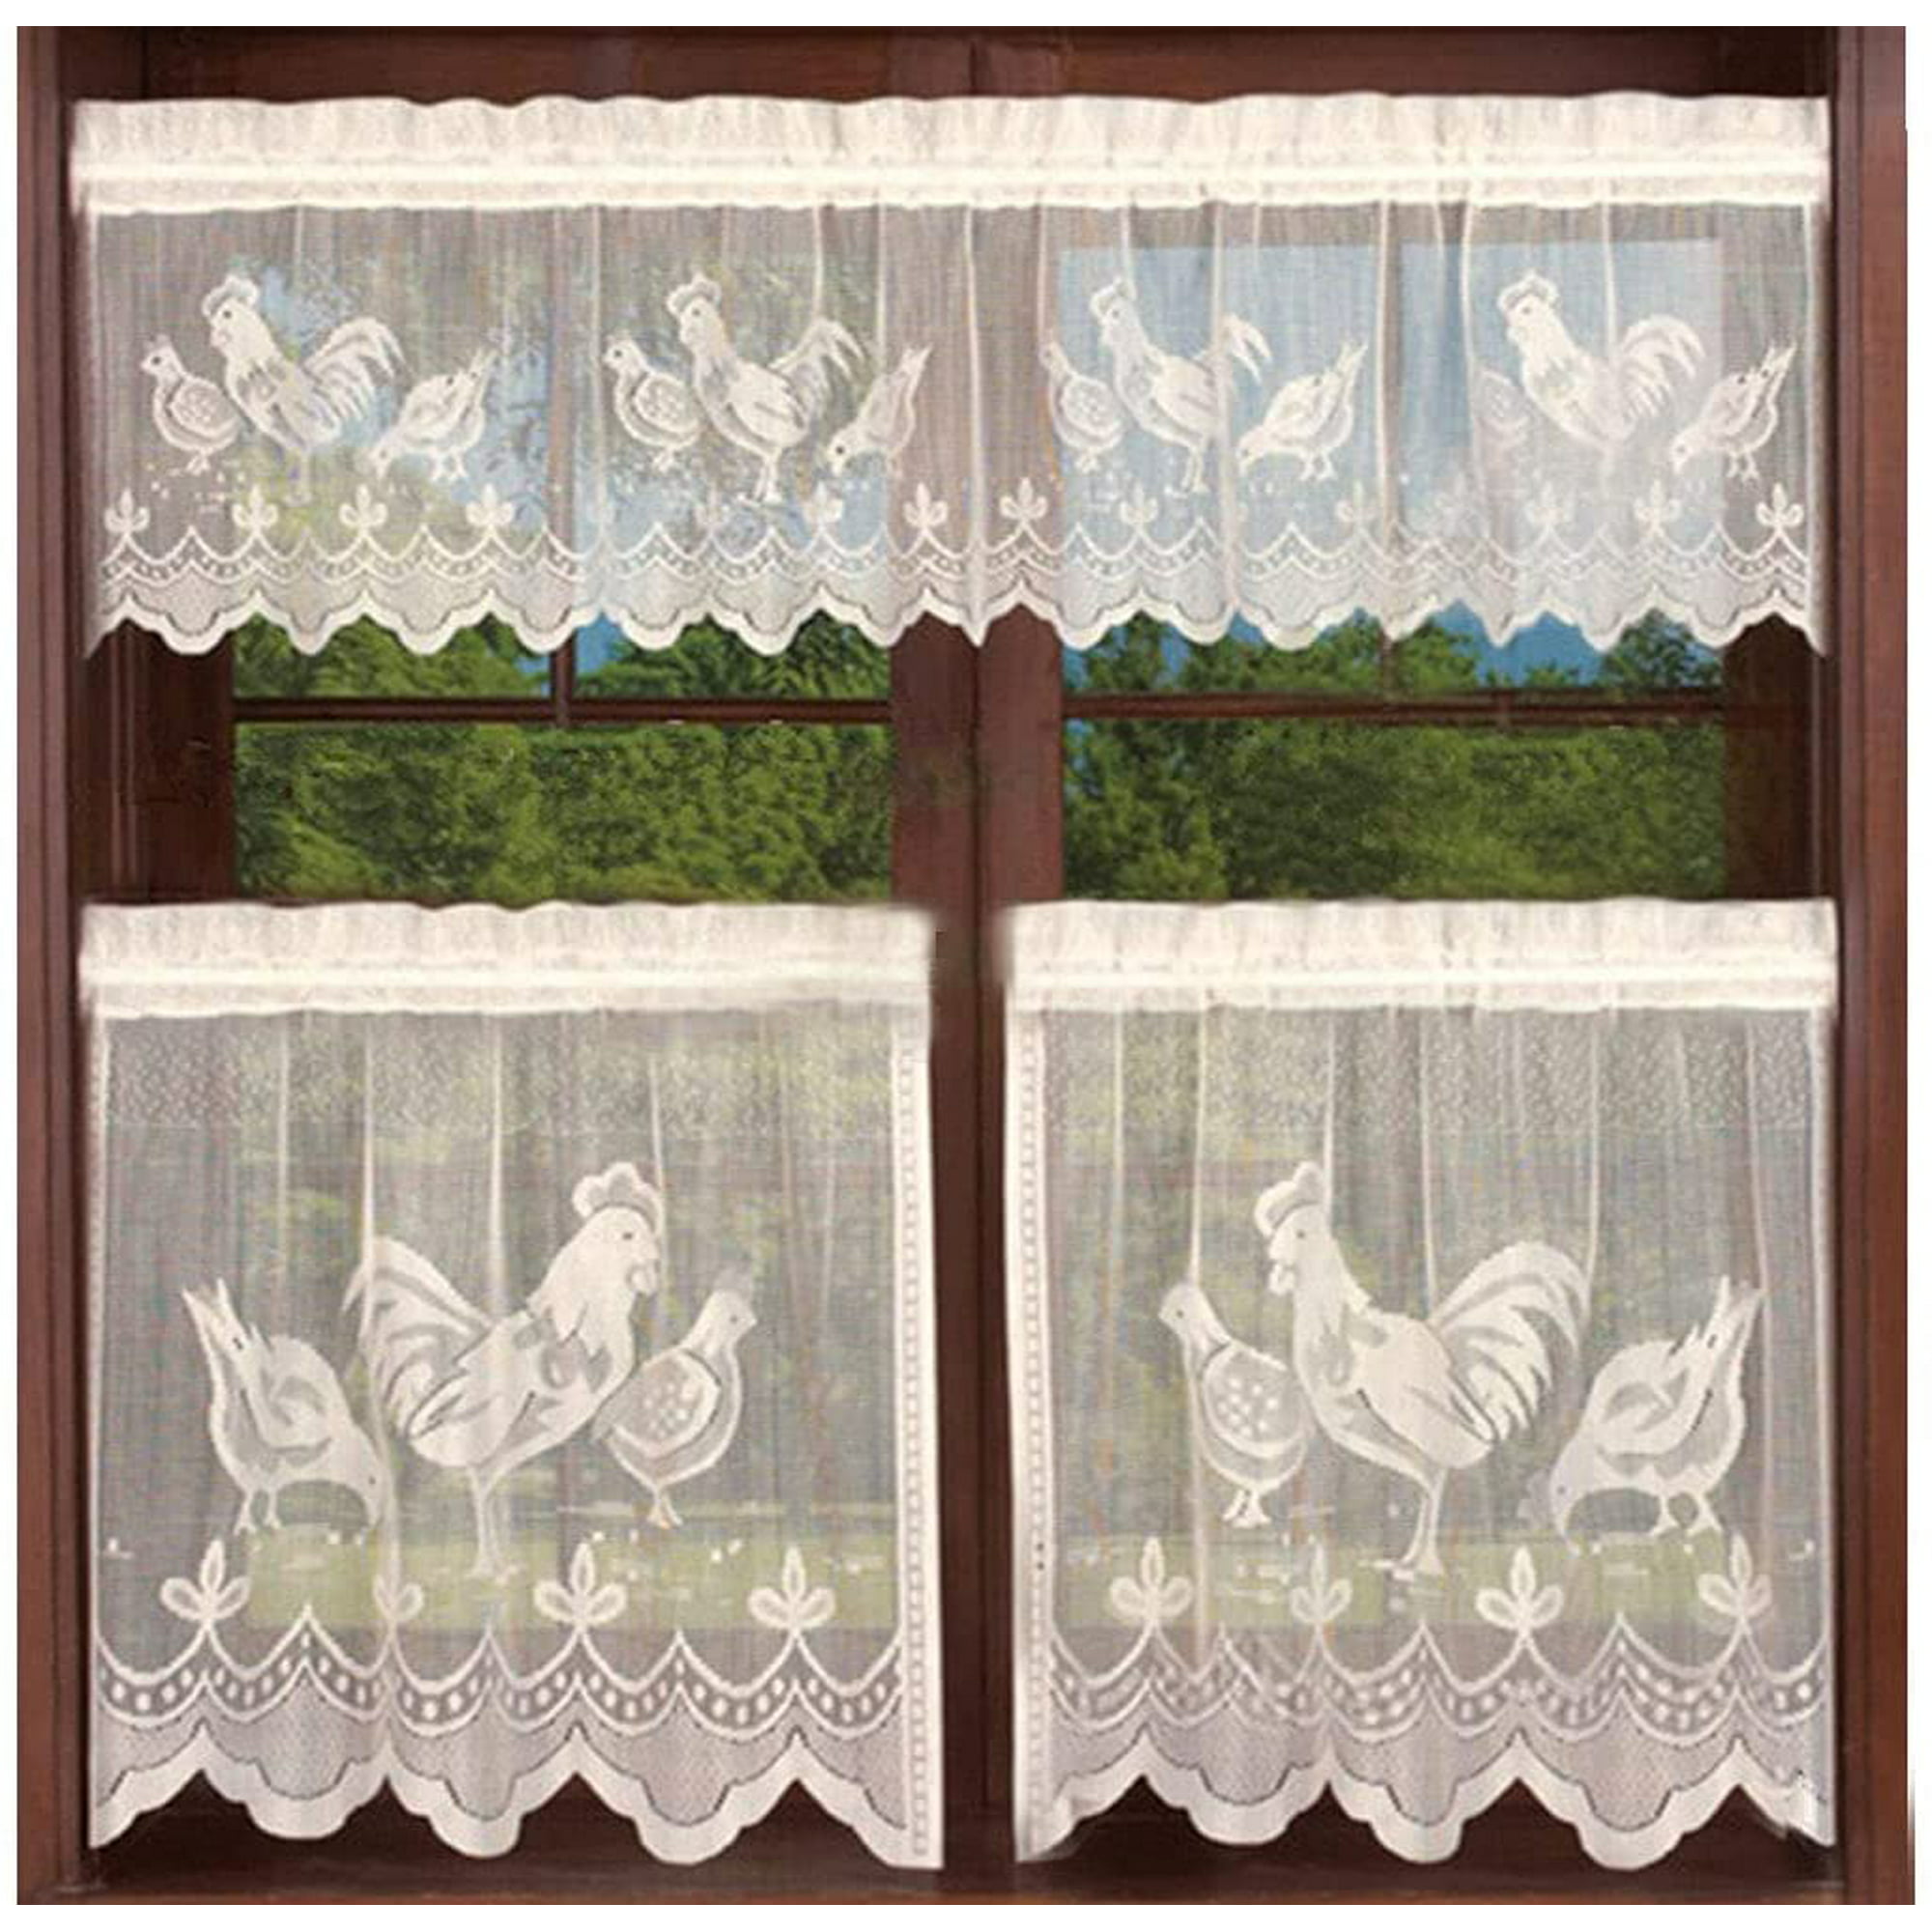 2 Tiers and 1 Valance Curtains, Sheer Kitchen Curtain Valance for Windows,  Chickens White Net Curtains, Animal Shape Decor Window Set for Cafe Bistro,  1 Pcs W150H36 cm, 2 Pcs W75H90 cm | Walmart Canada